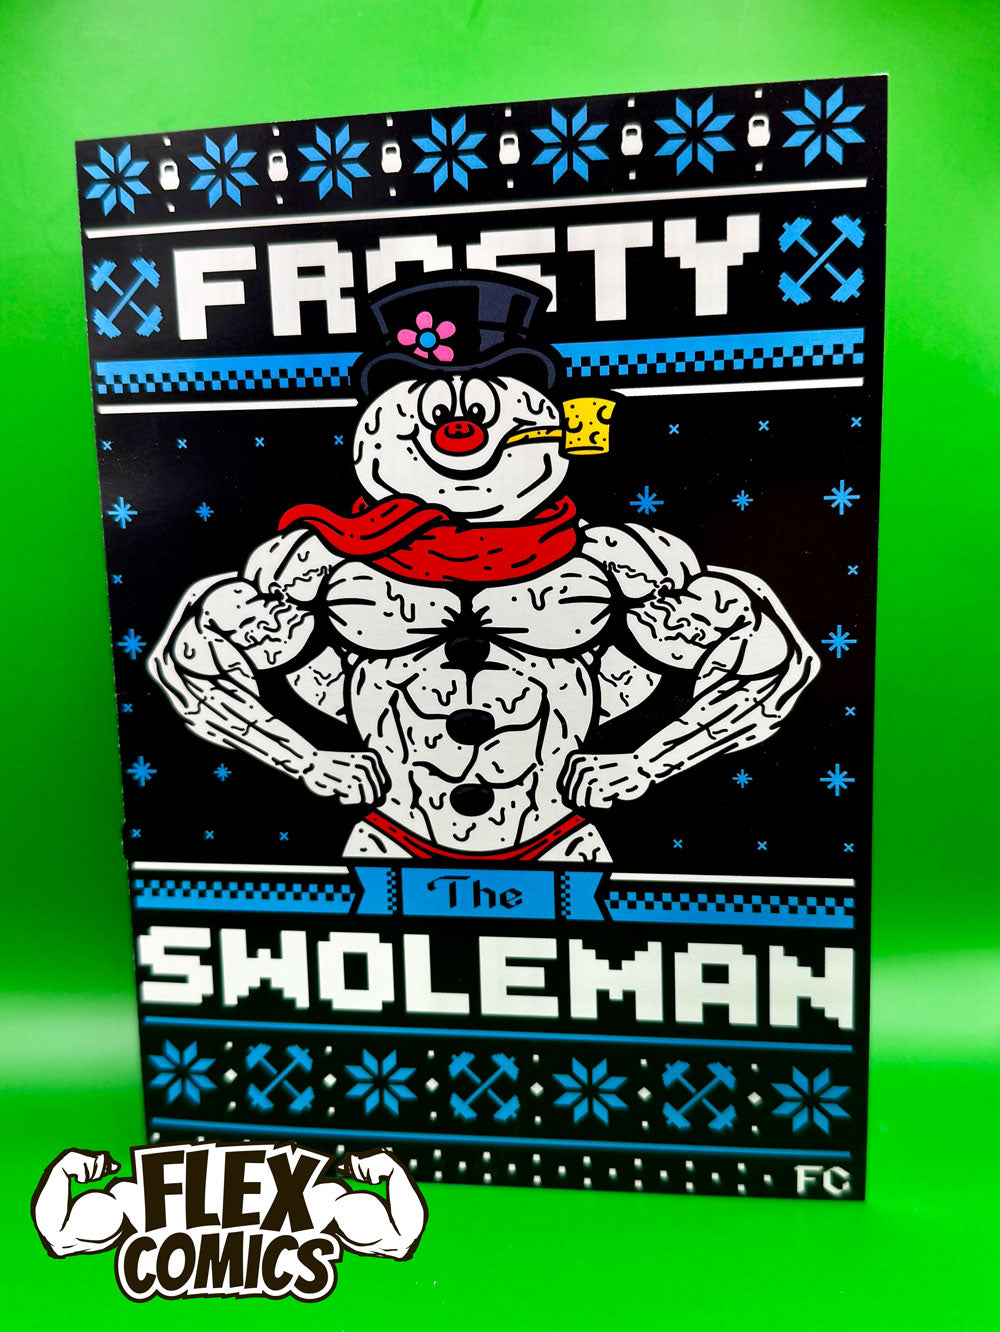 North Swole Greeting Cards: 10 Per Pack